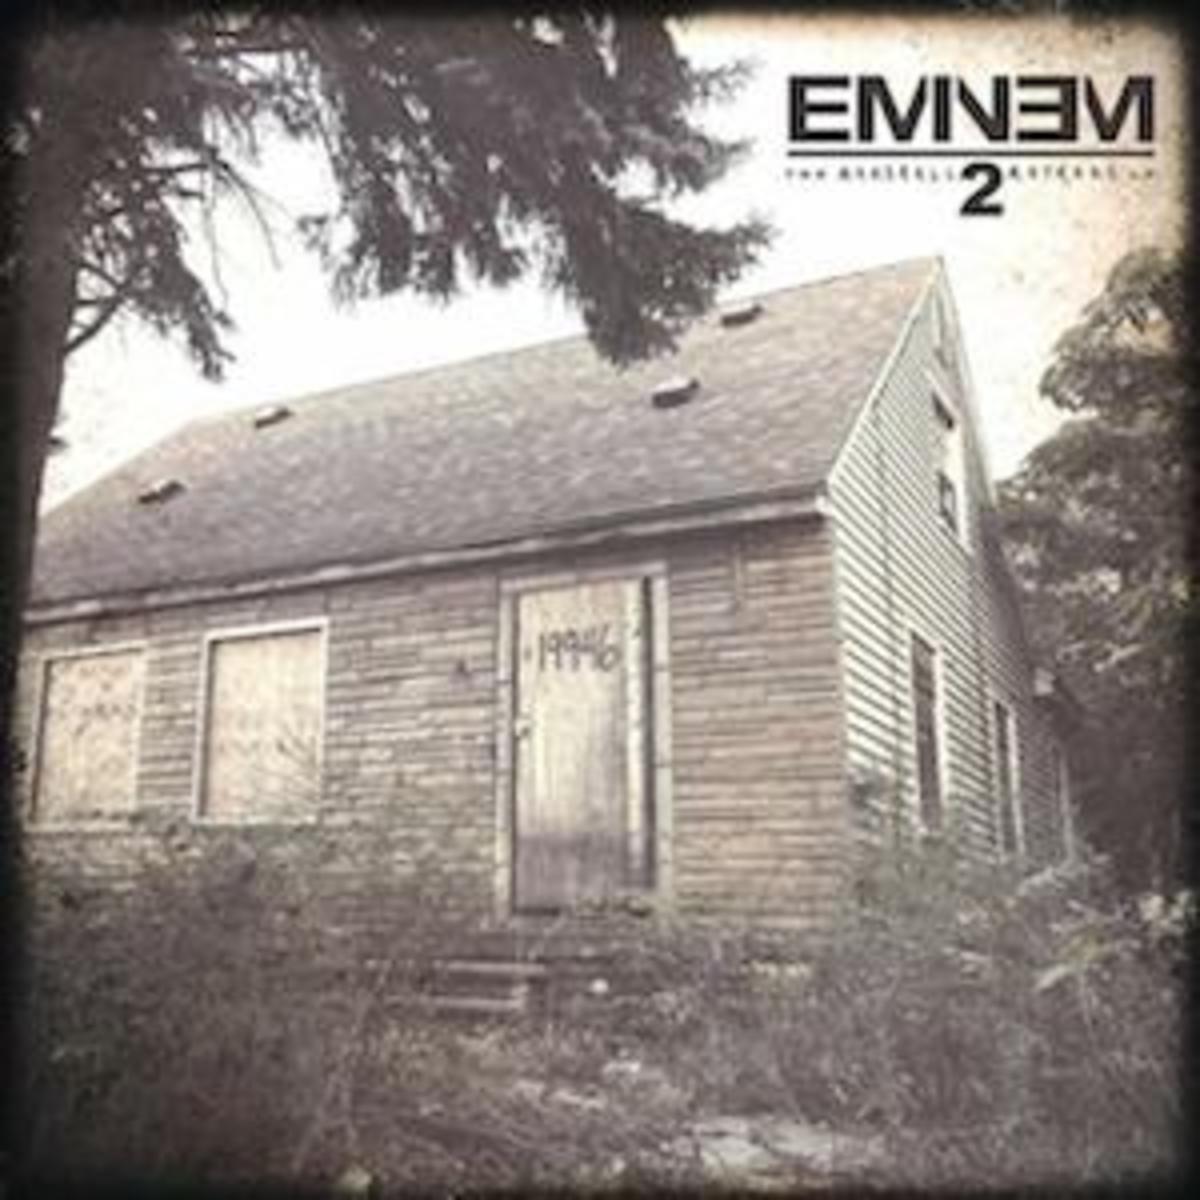 Eminem released his first album in over three years in 'Marshall Mathers LP2' on Wednesday and has already been at number one on iTunes and on Billboards Top 100. 